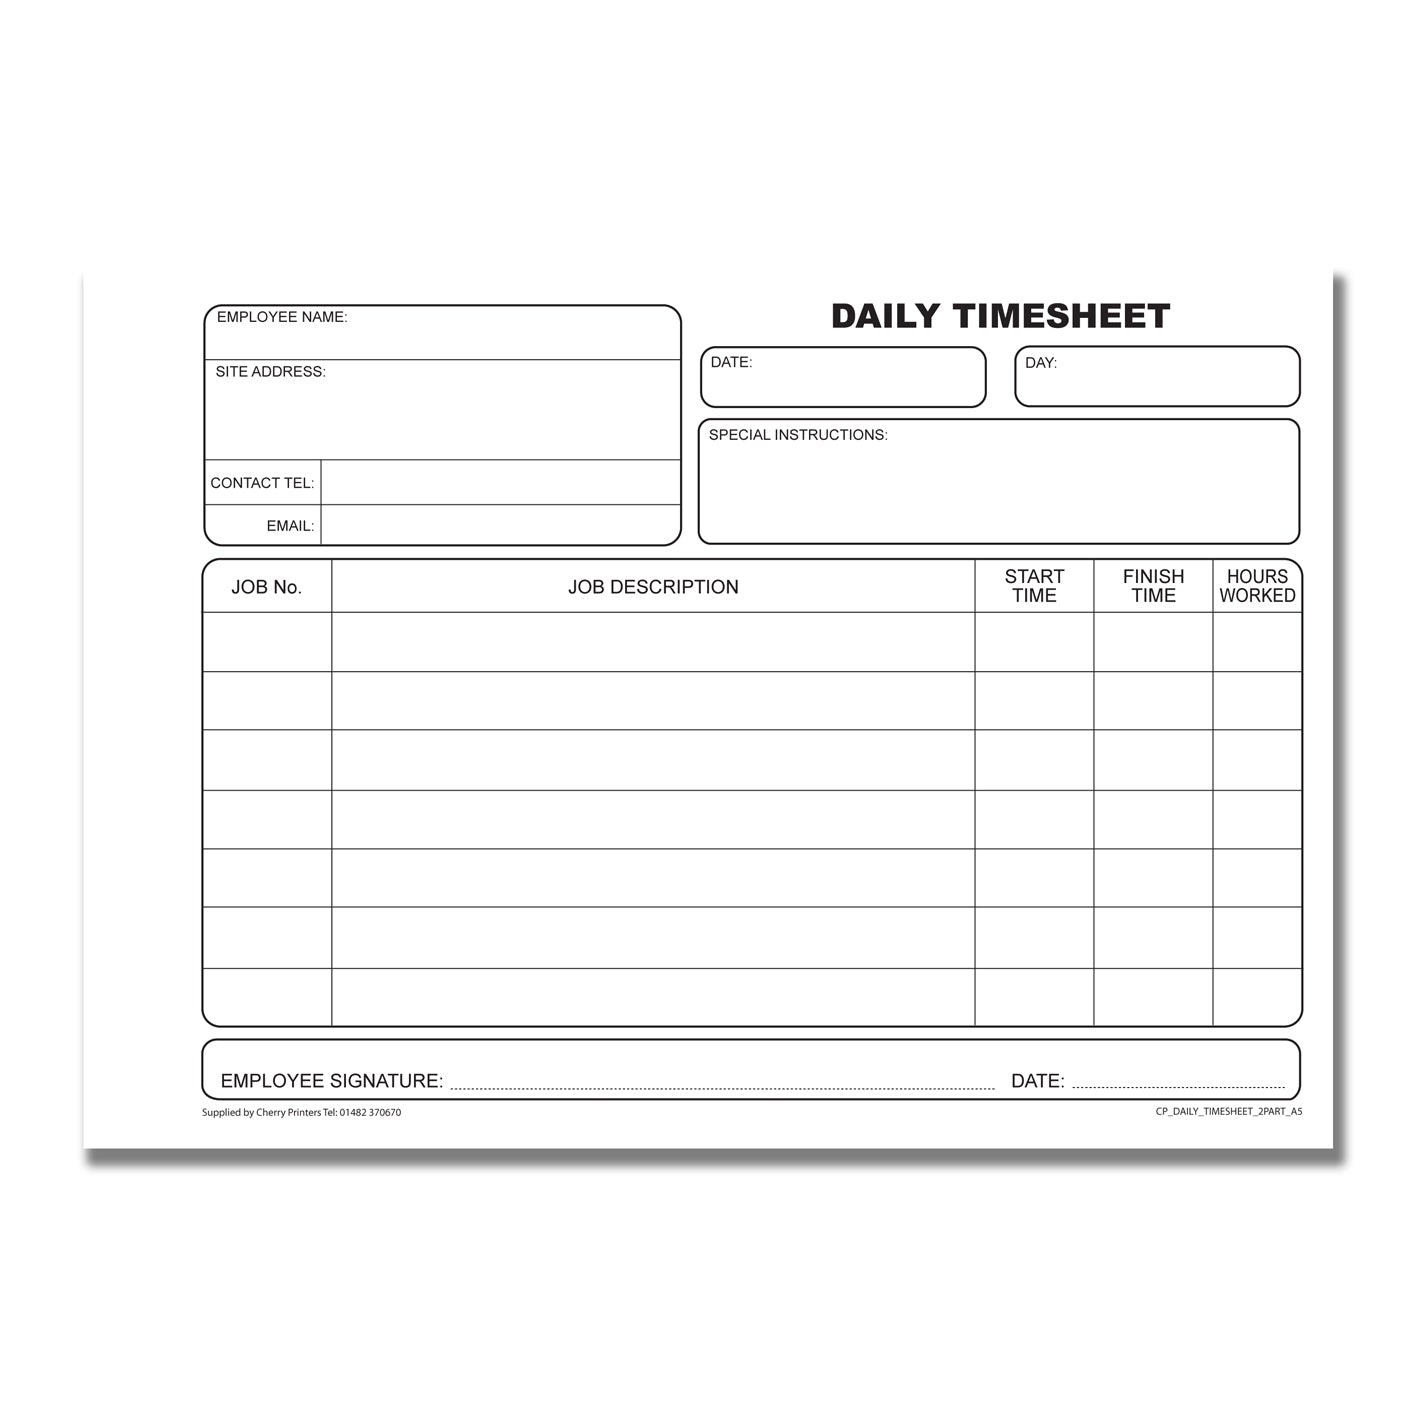 NCR Daily Timesheet Duplicate Book A5